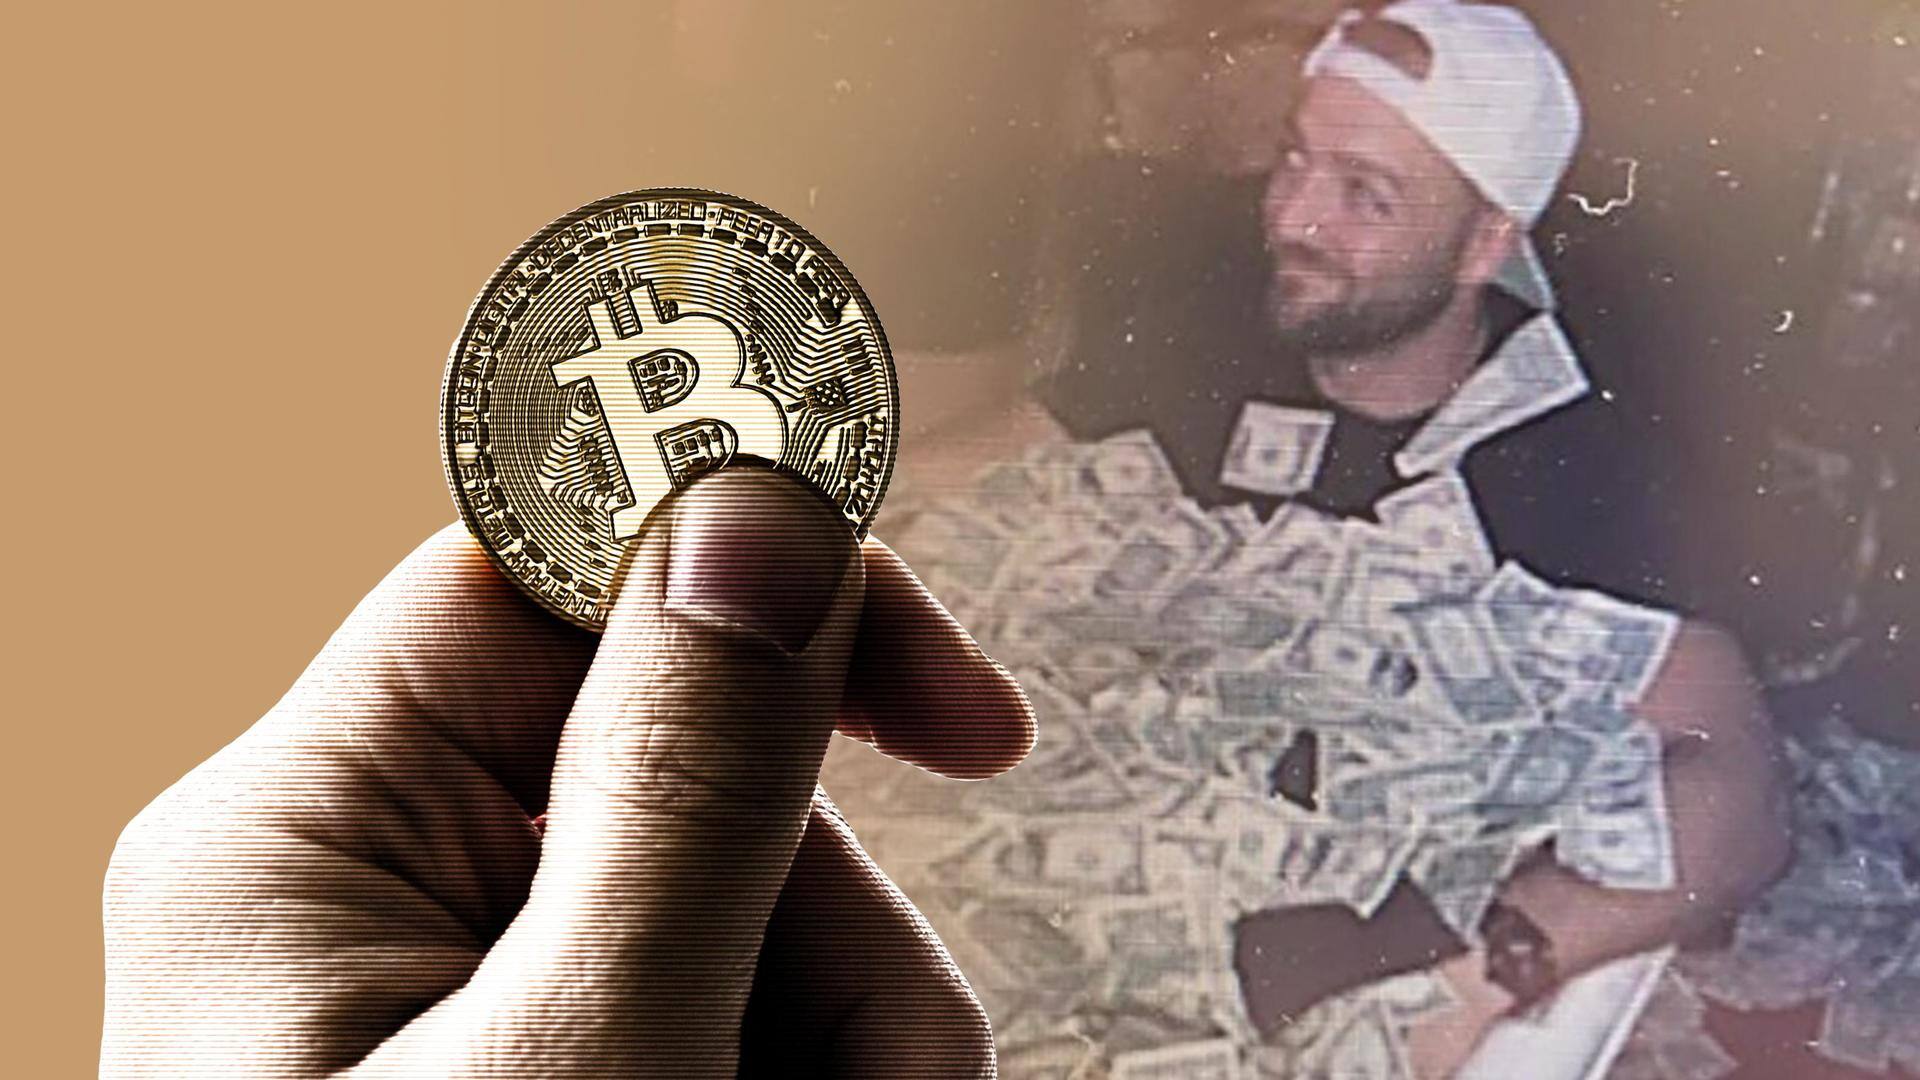 Bitcoin thief photographed in cash-filled bathtub gets 4-year sentence